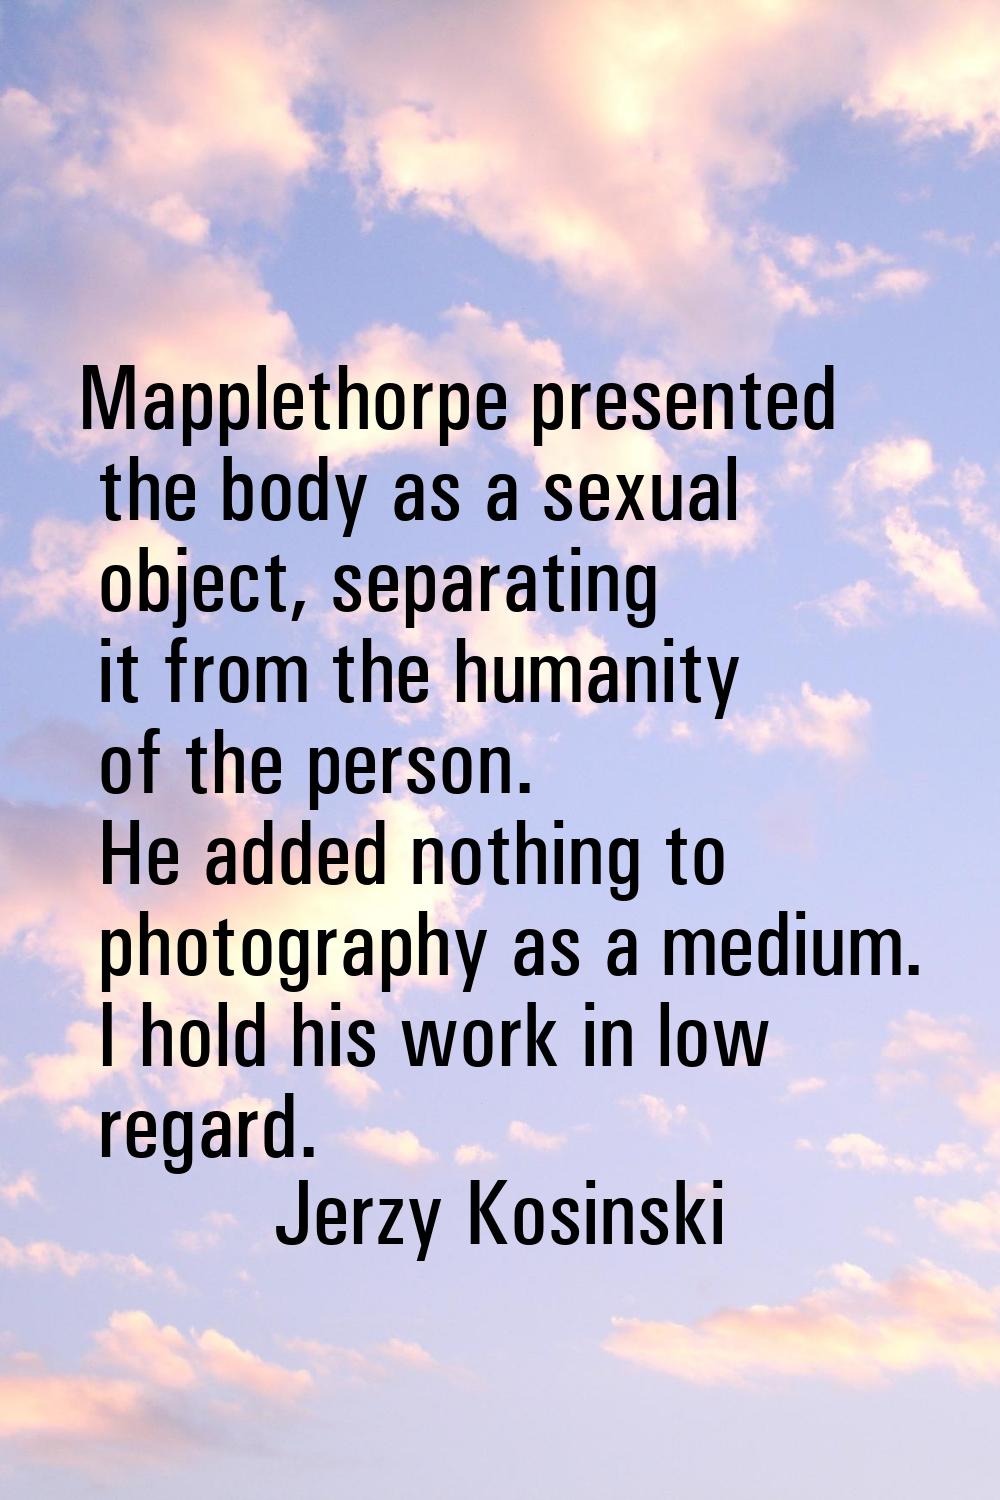 Mapplethorpe presented the body as a sexual object, separating it from the humanity of the person. 